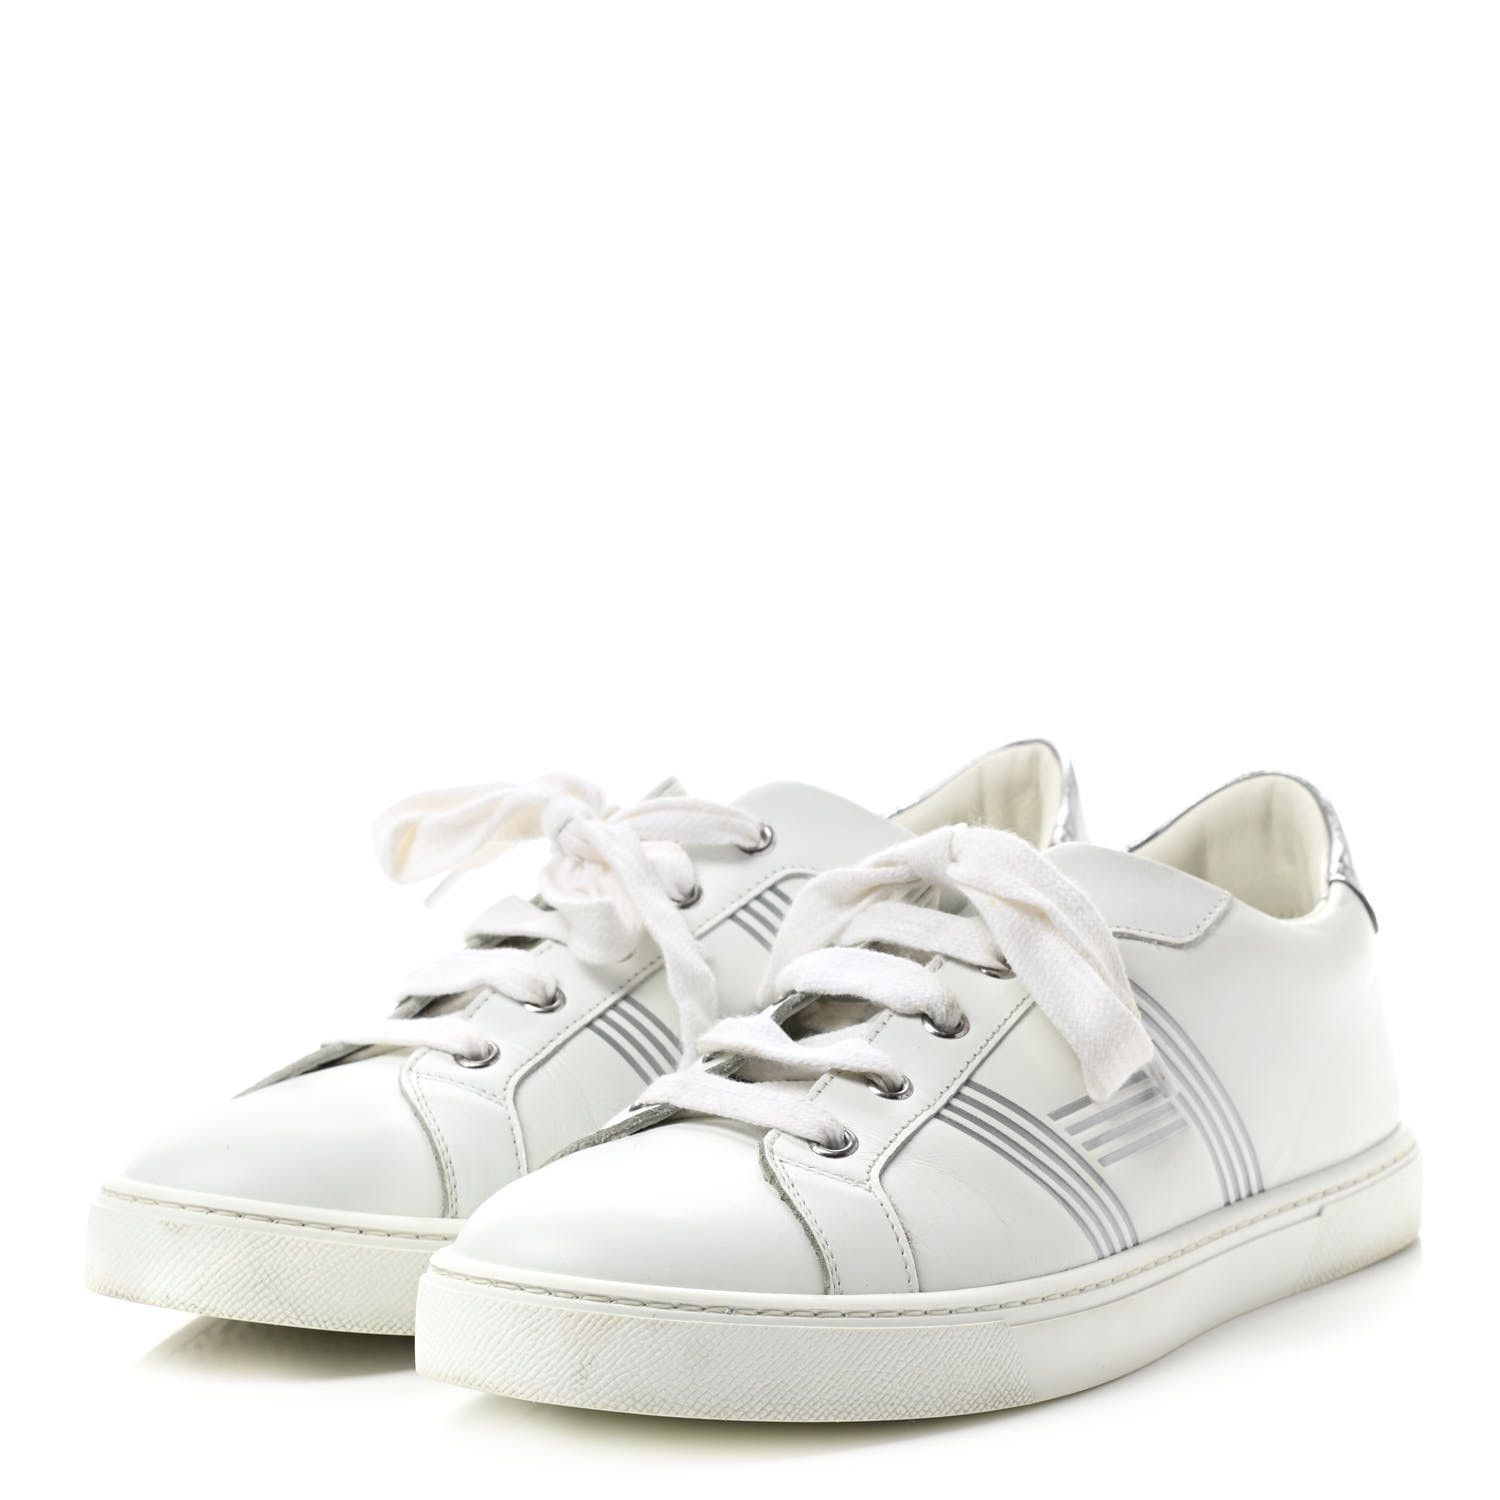 HERMES

Nappa Womens Avantage Sneakers 40 White Argent | Fashionphile